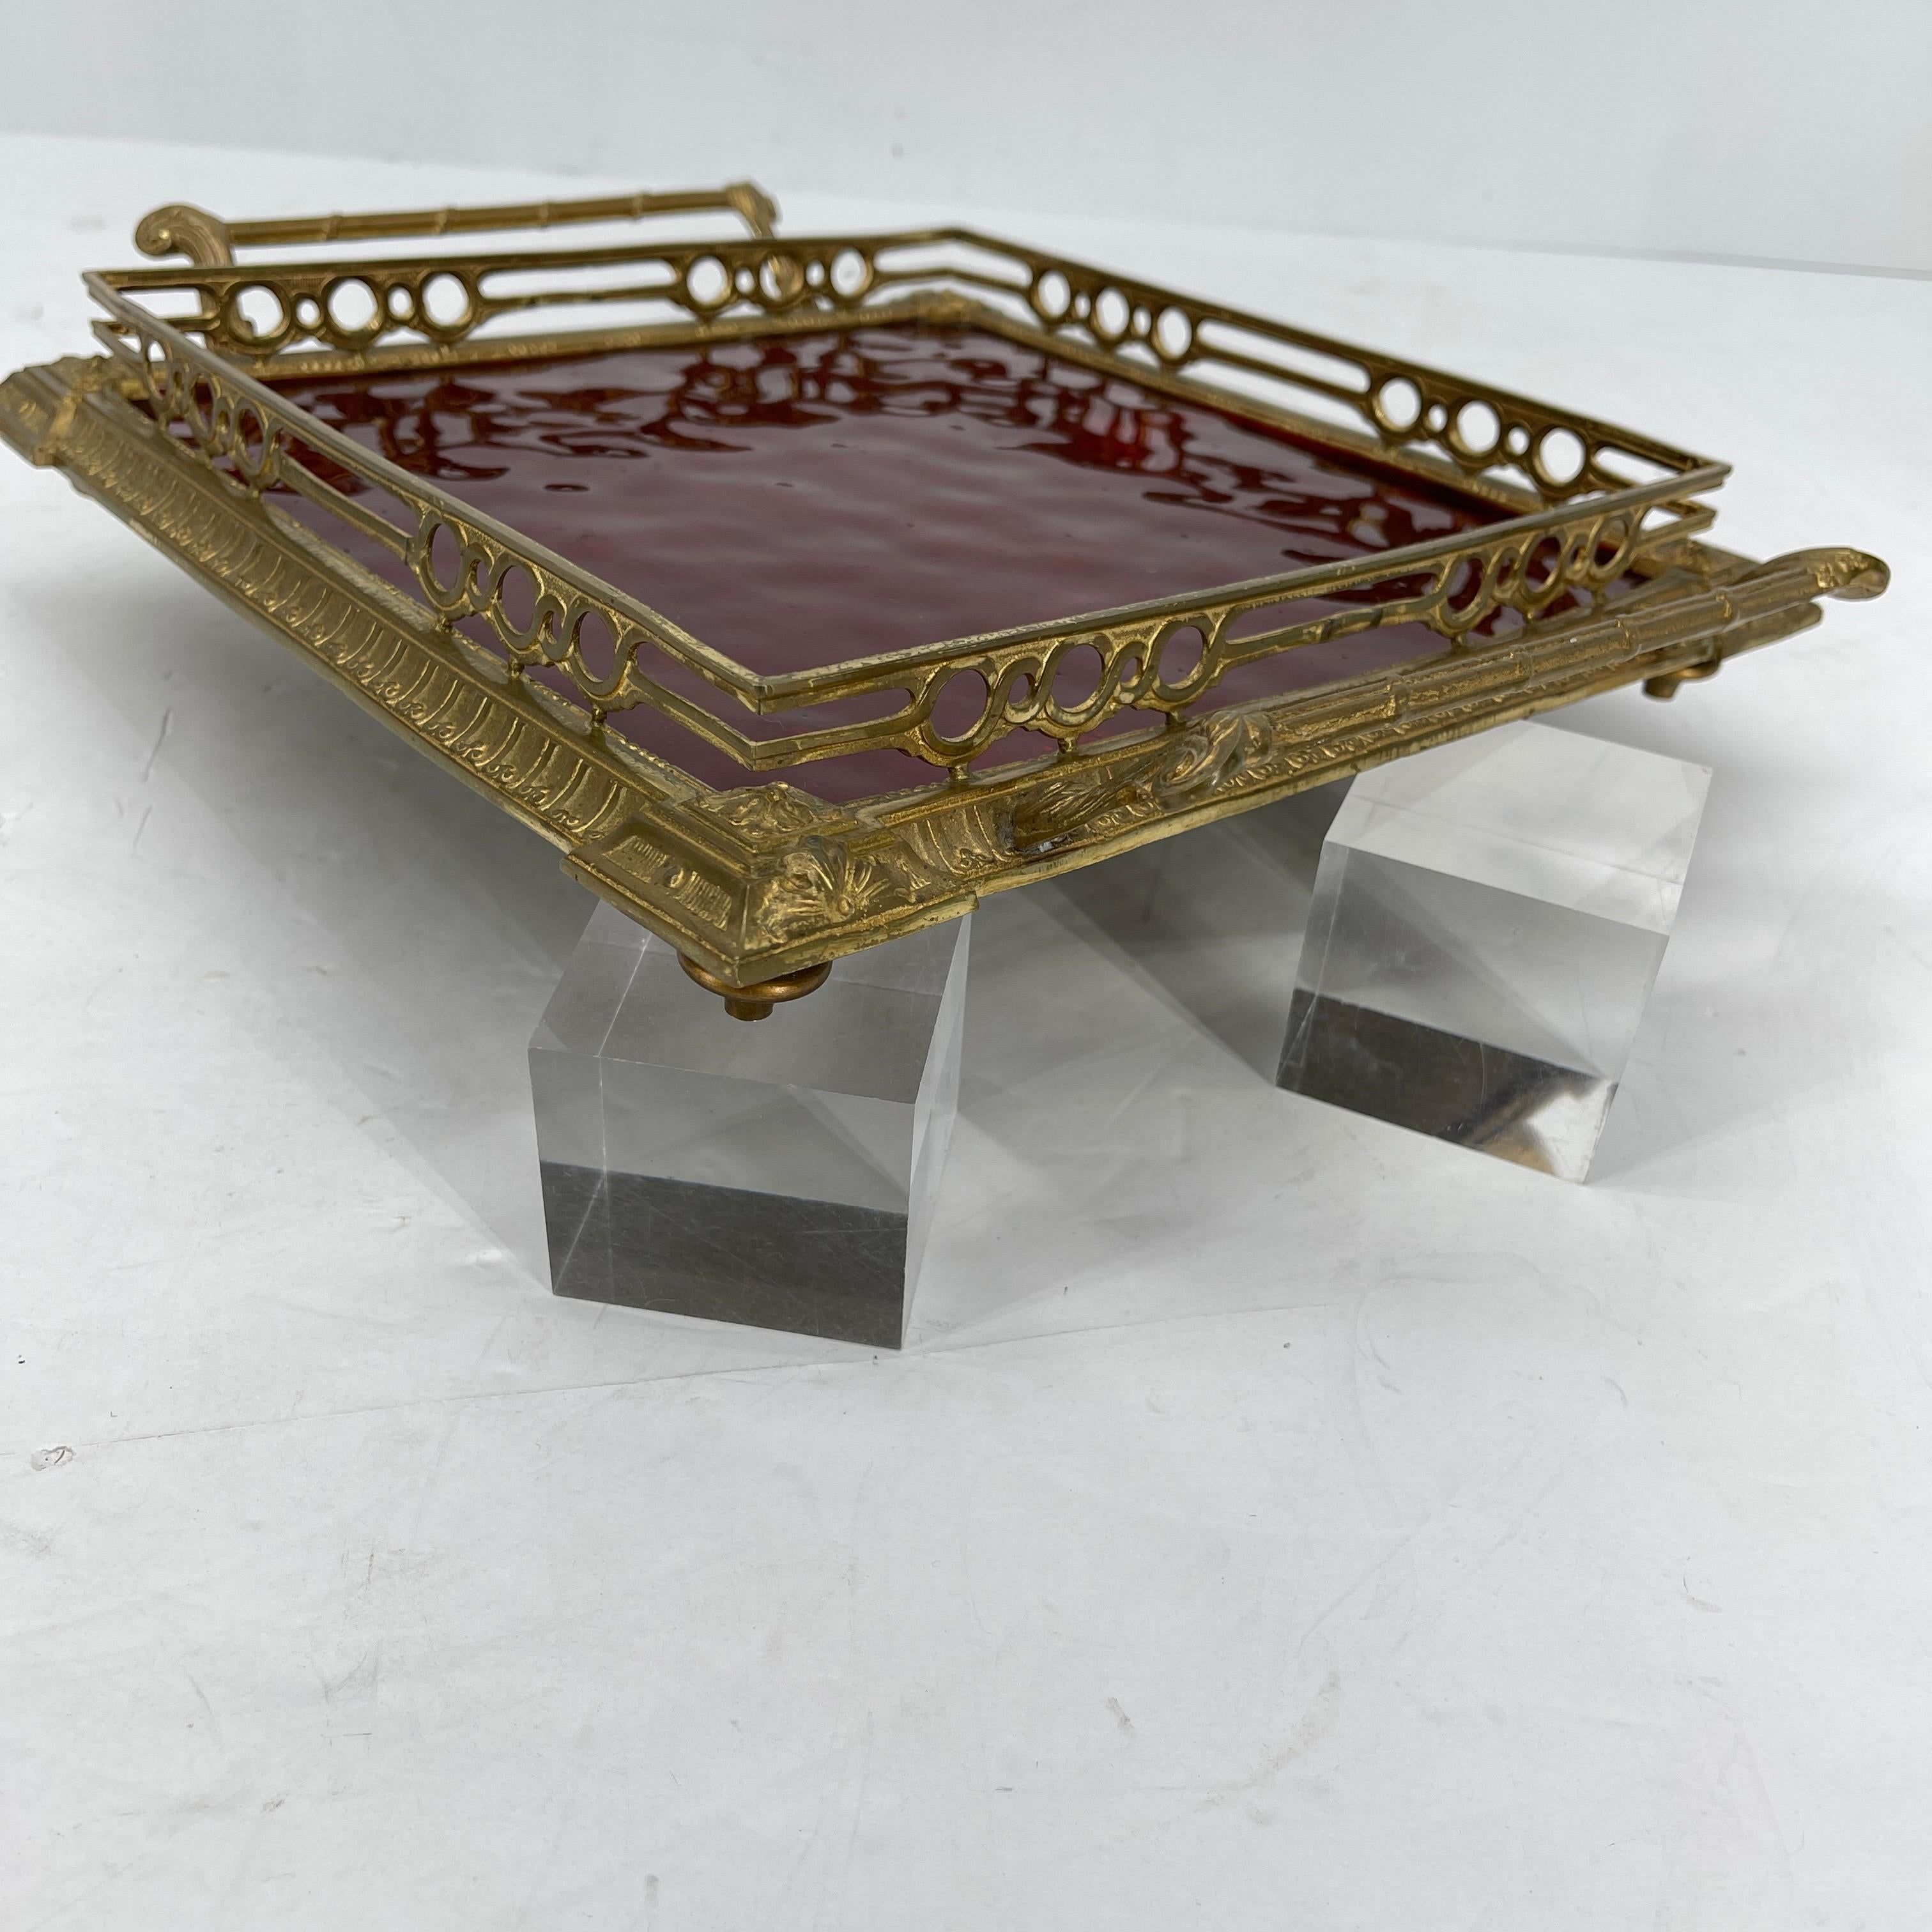 Metal Hollywood Regency Gilt Vanity Tray with Red Glass Insert and Handles